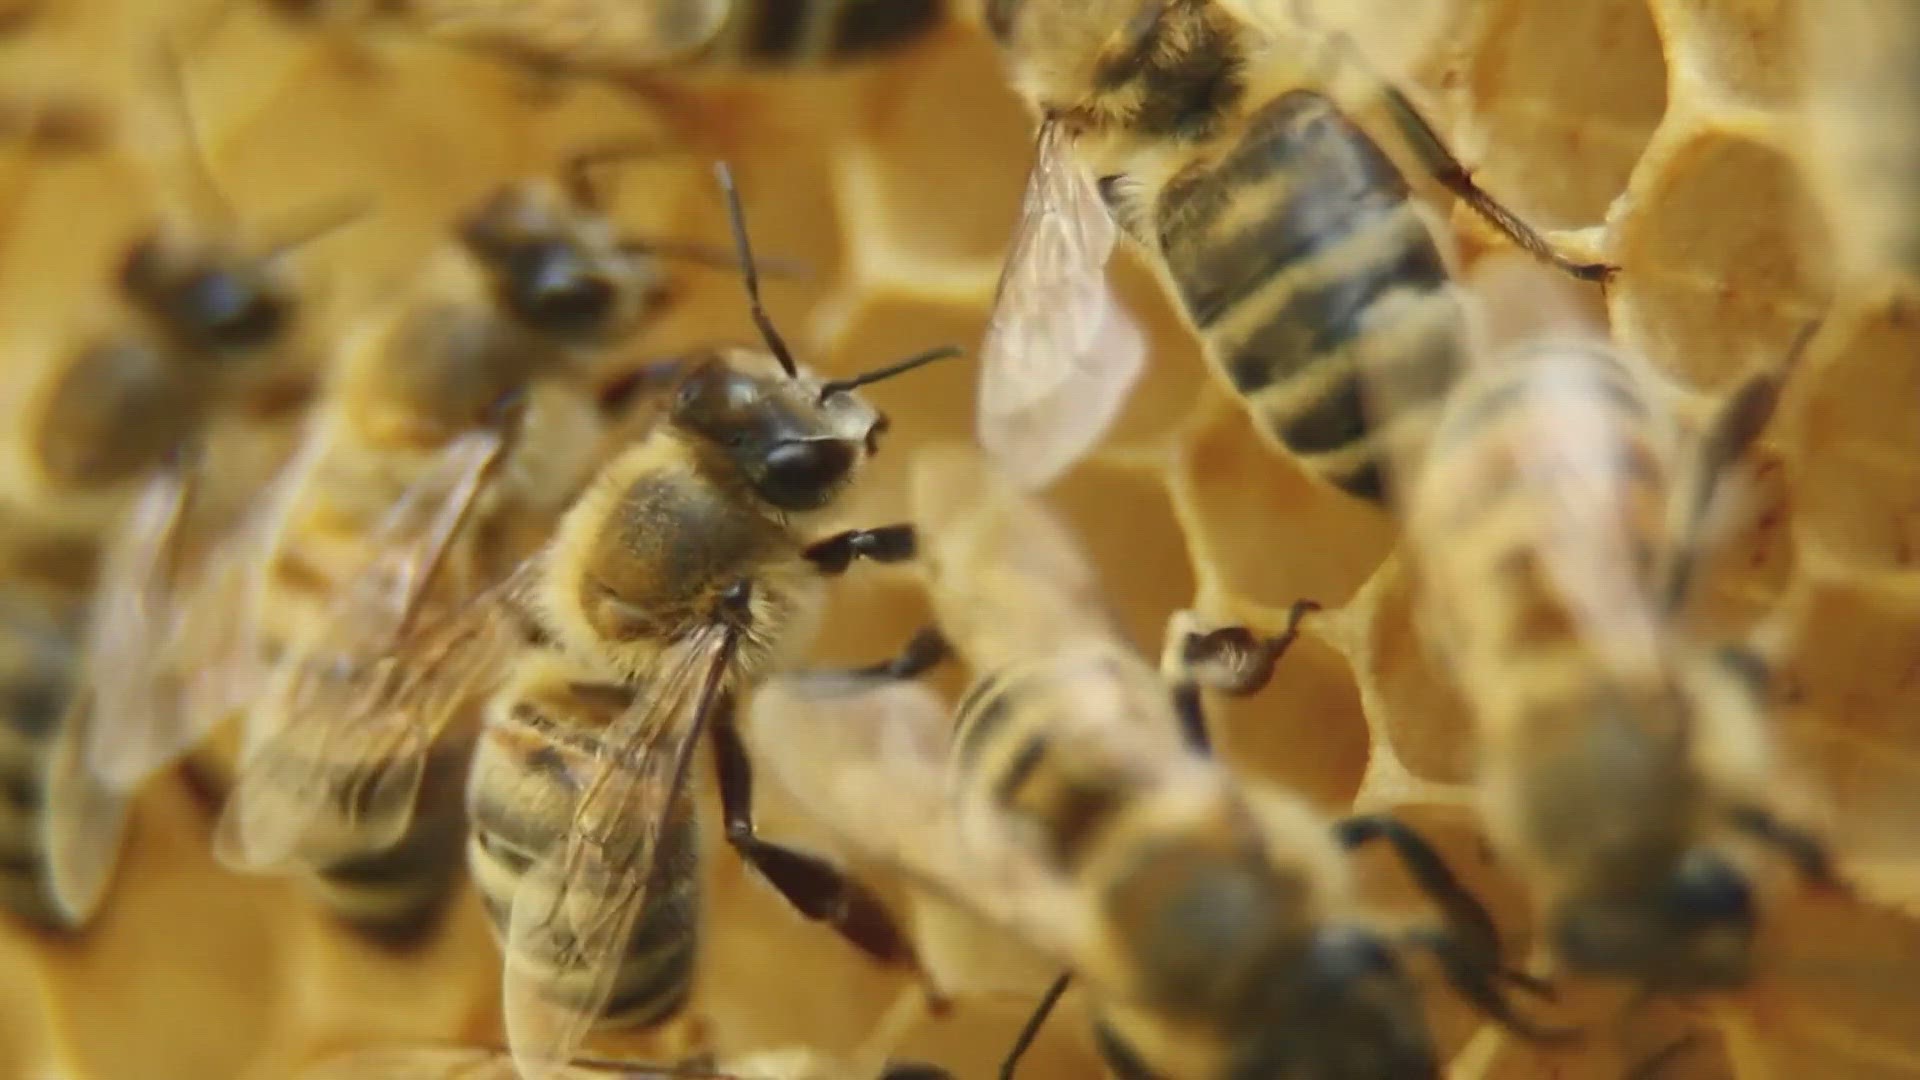 Local beekeepers say this heatwave is making it harder for the insects to find food for themselves and help make food for us.